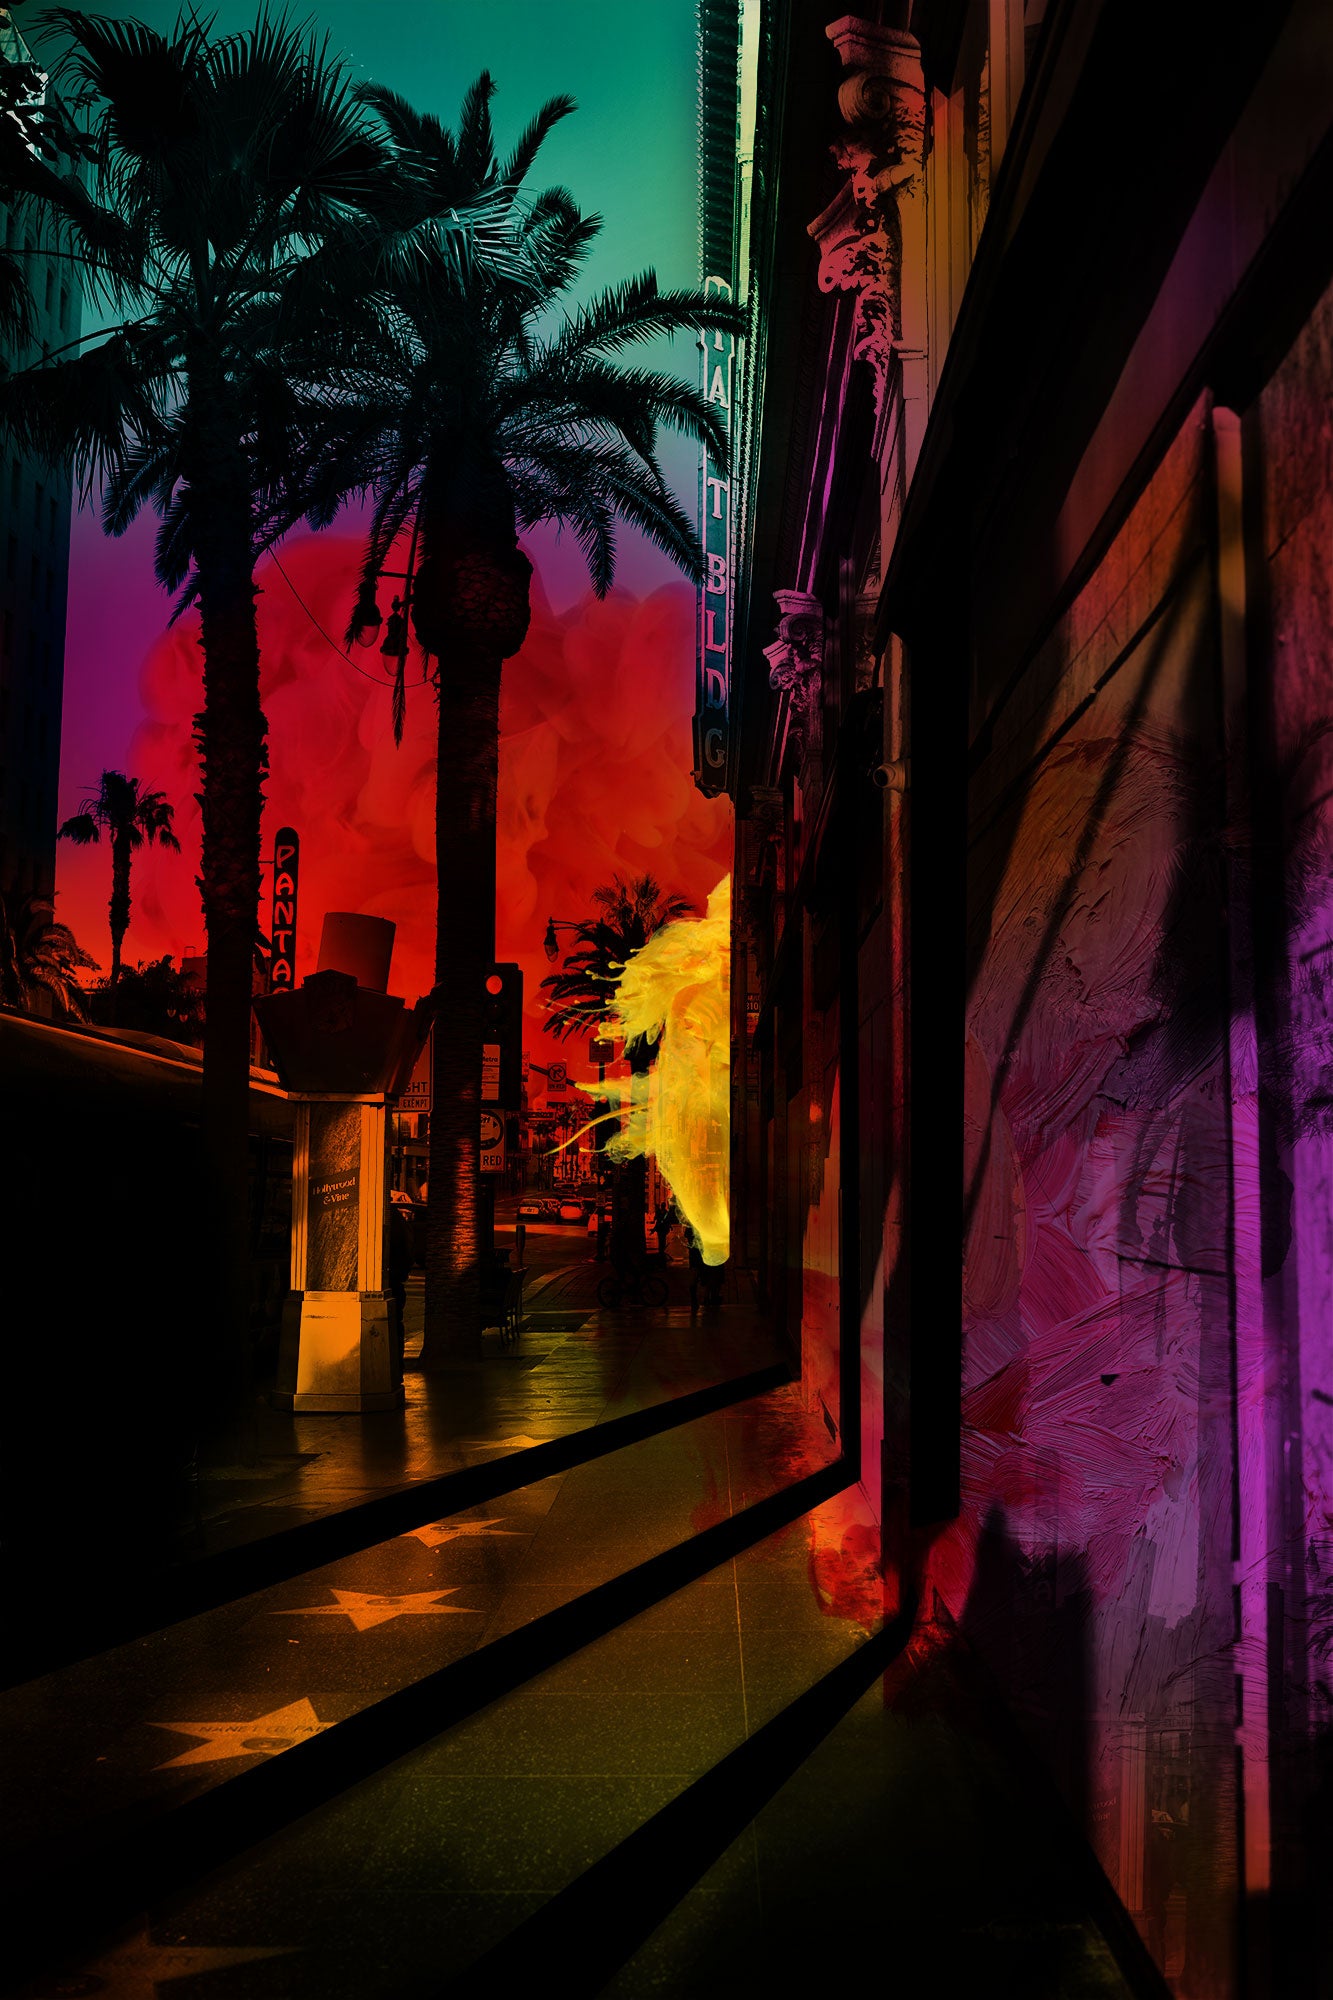 Photographic Digital Collage of Hollywood Blvd with Vibrant Colors and Textured Layers